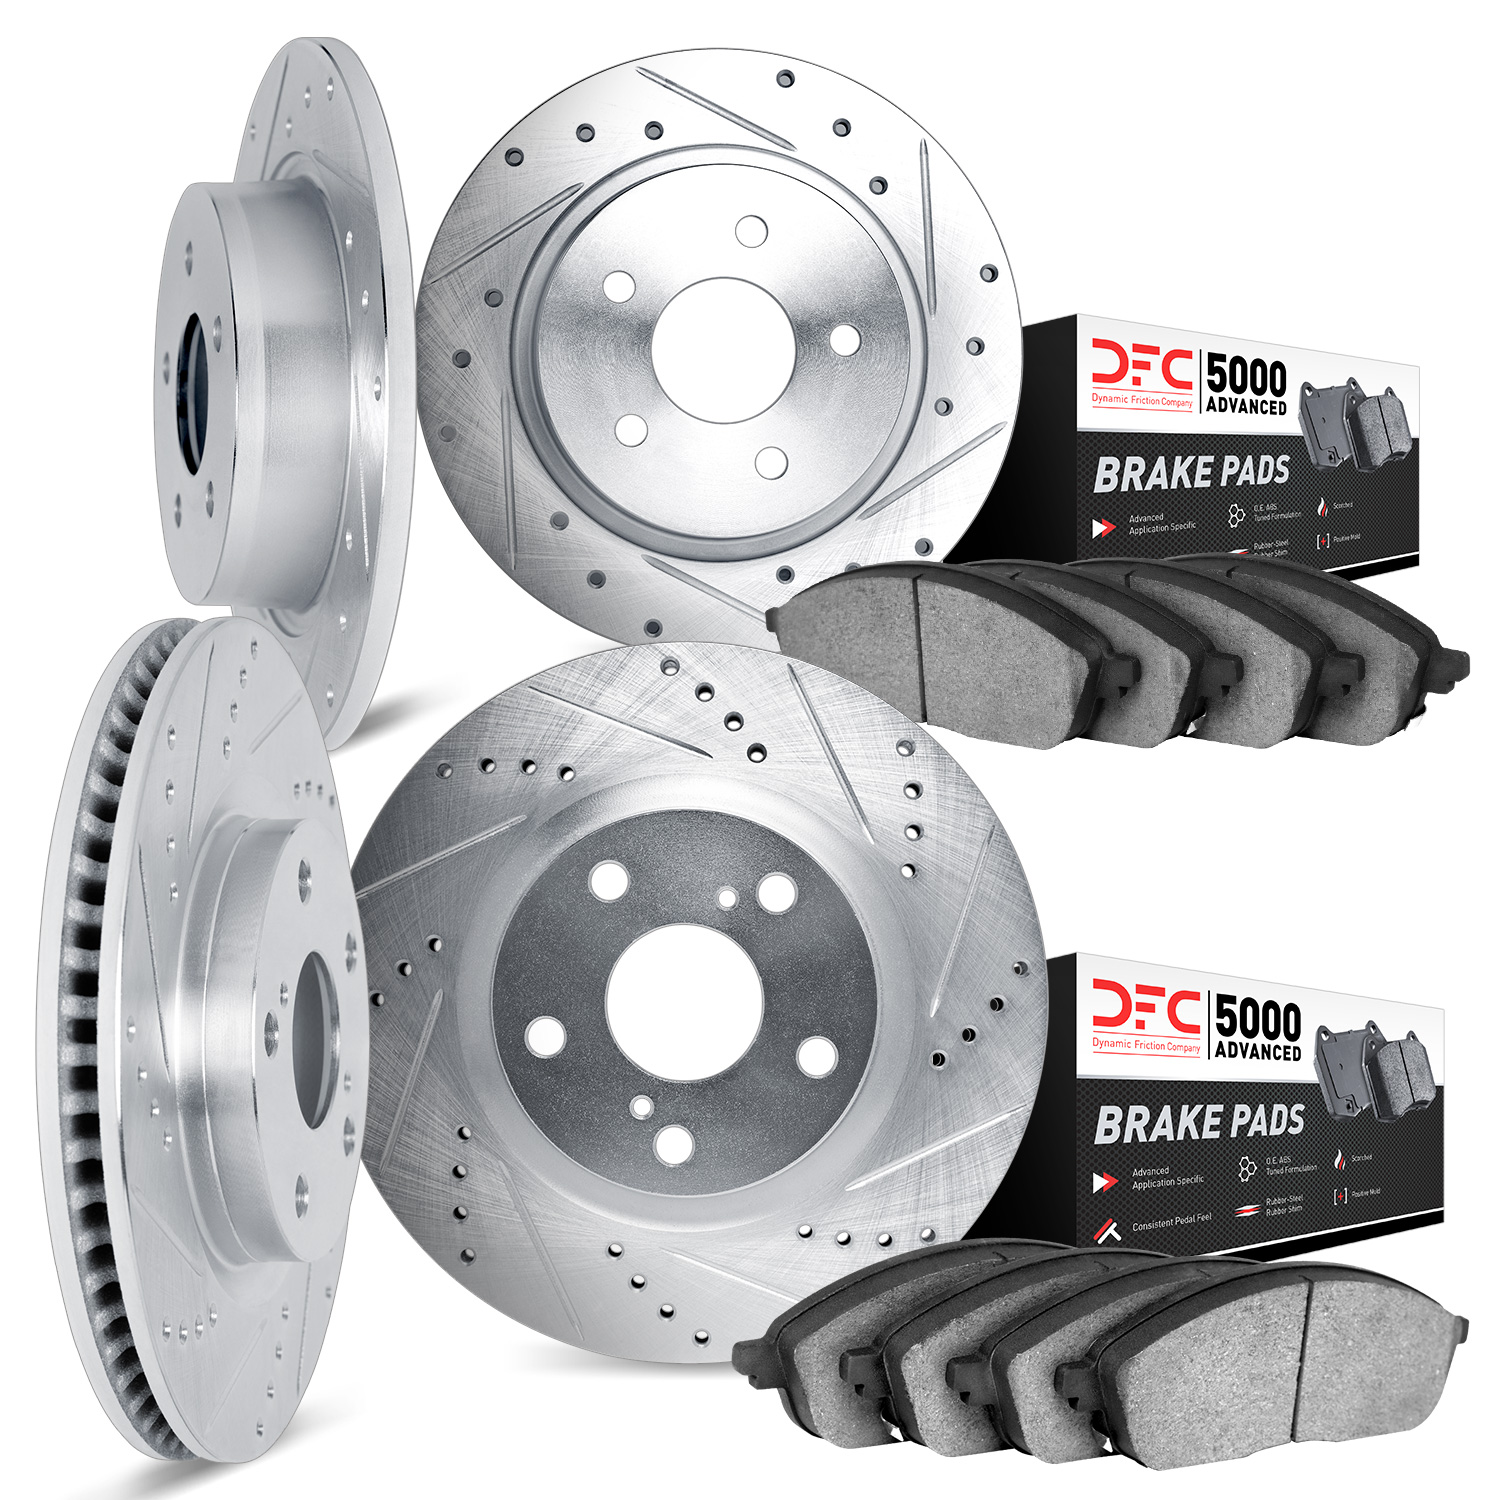 7504-59075 Drilled/Slotted Brake Rotors w/5000 Advanced Brake Pads Kit [Silver], Fits Select Acura/Honda, Position: Front and Re